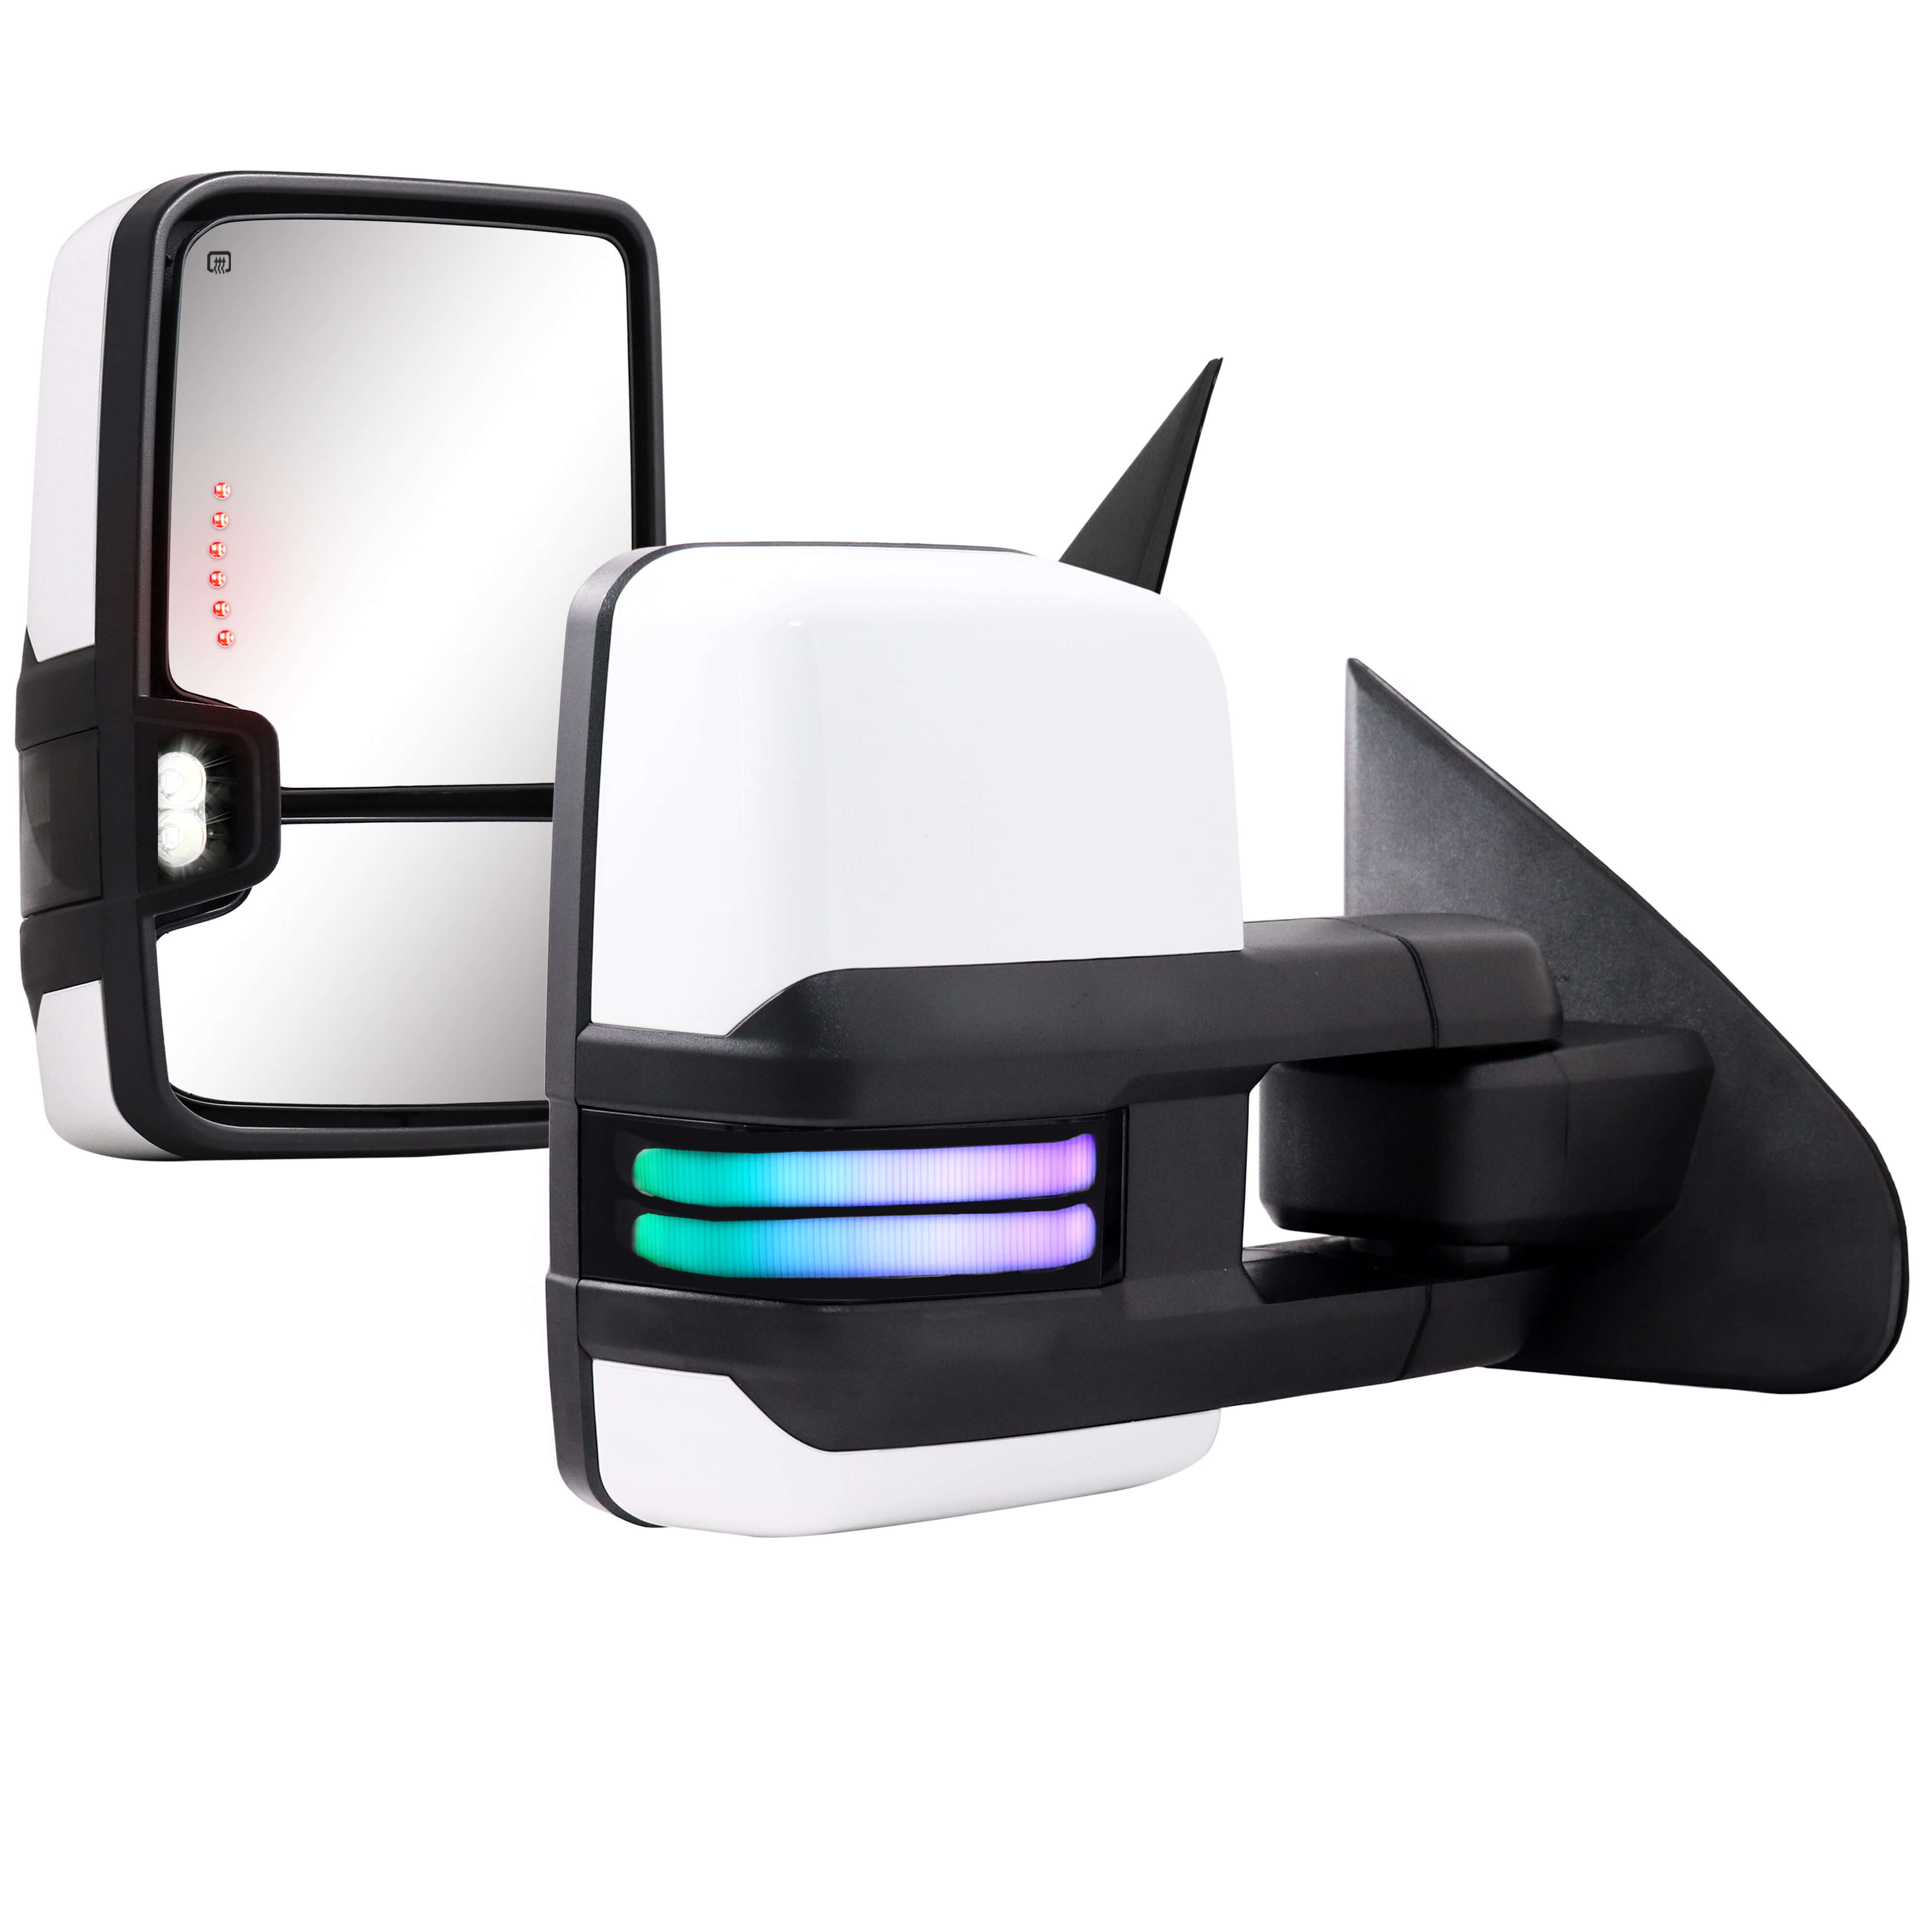 RGB Towing Mirrors with Adjustable Lighting for 2014 - 2019 CHEVY Silverado GMC Sierra etc.